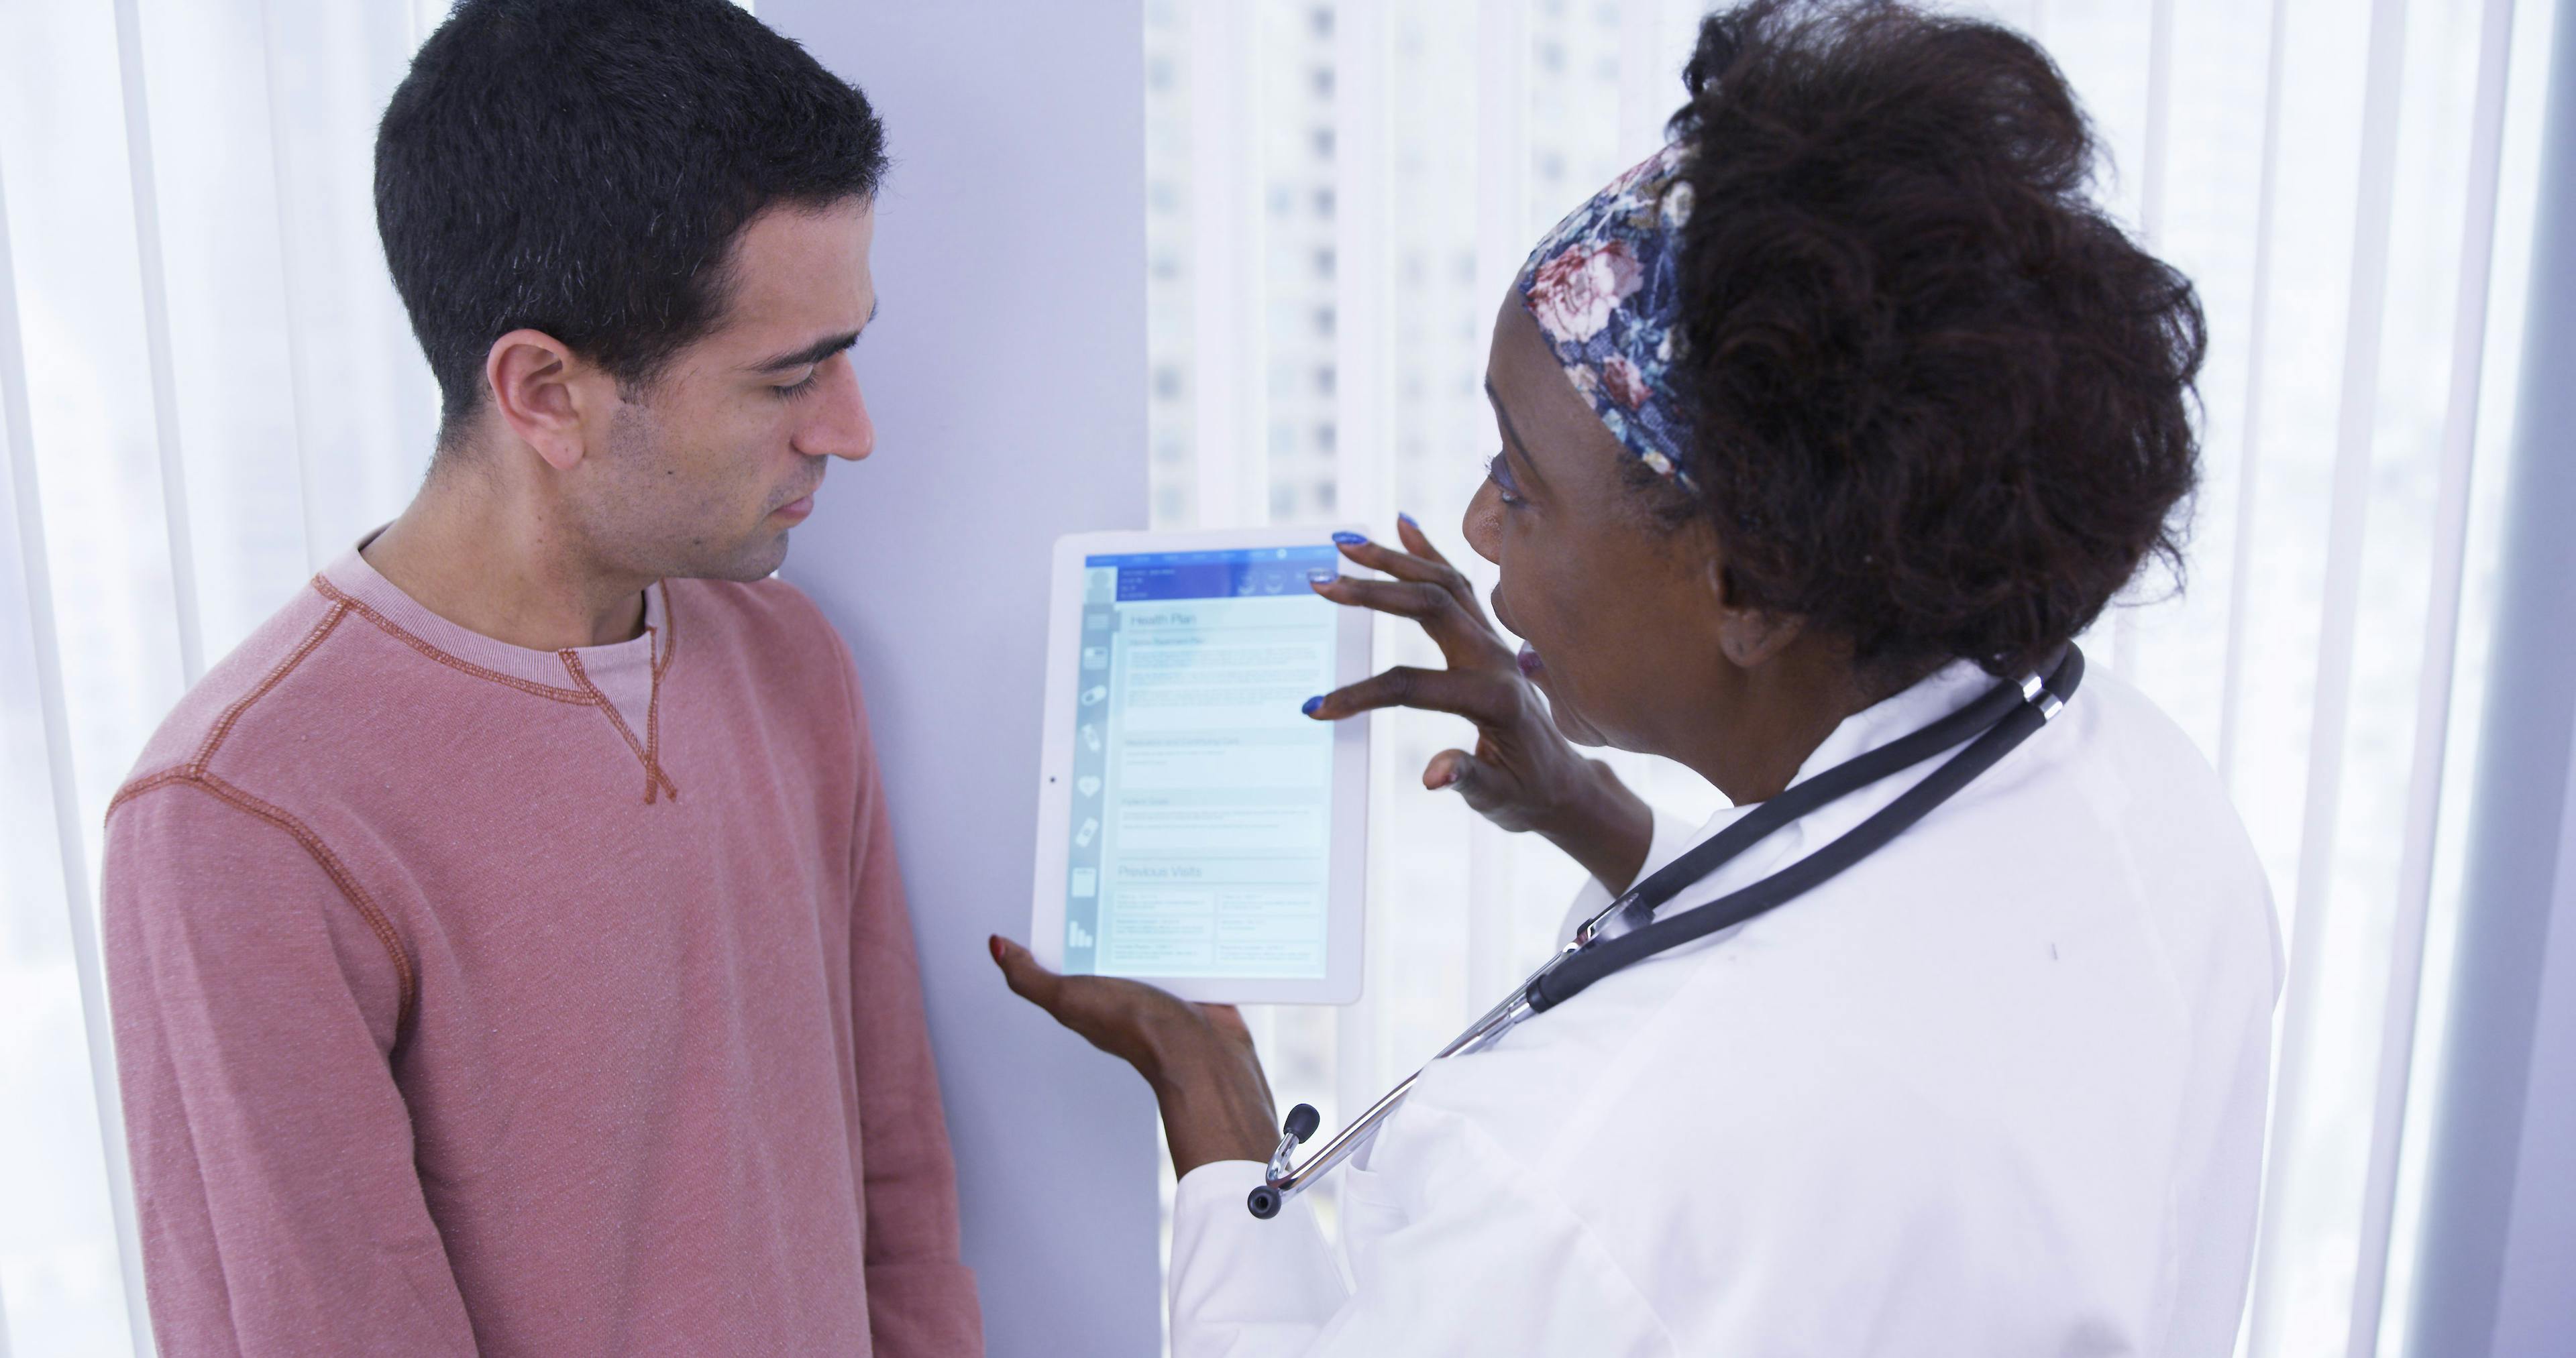 How Can Improving Provider-Patient Relationships Help Reverse Chronic Disease?